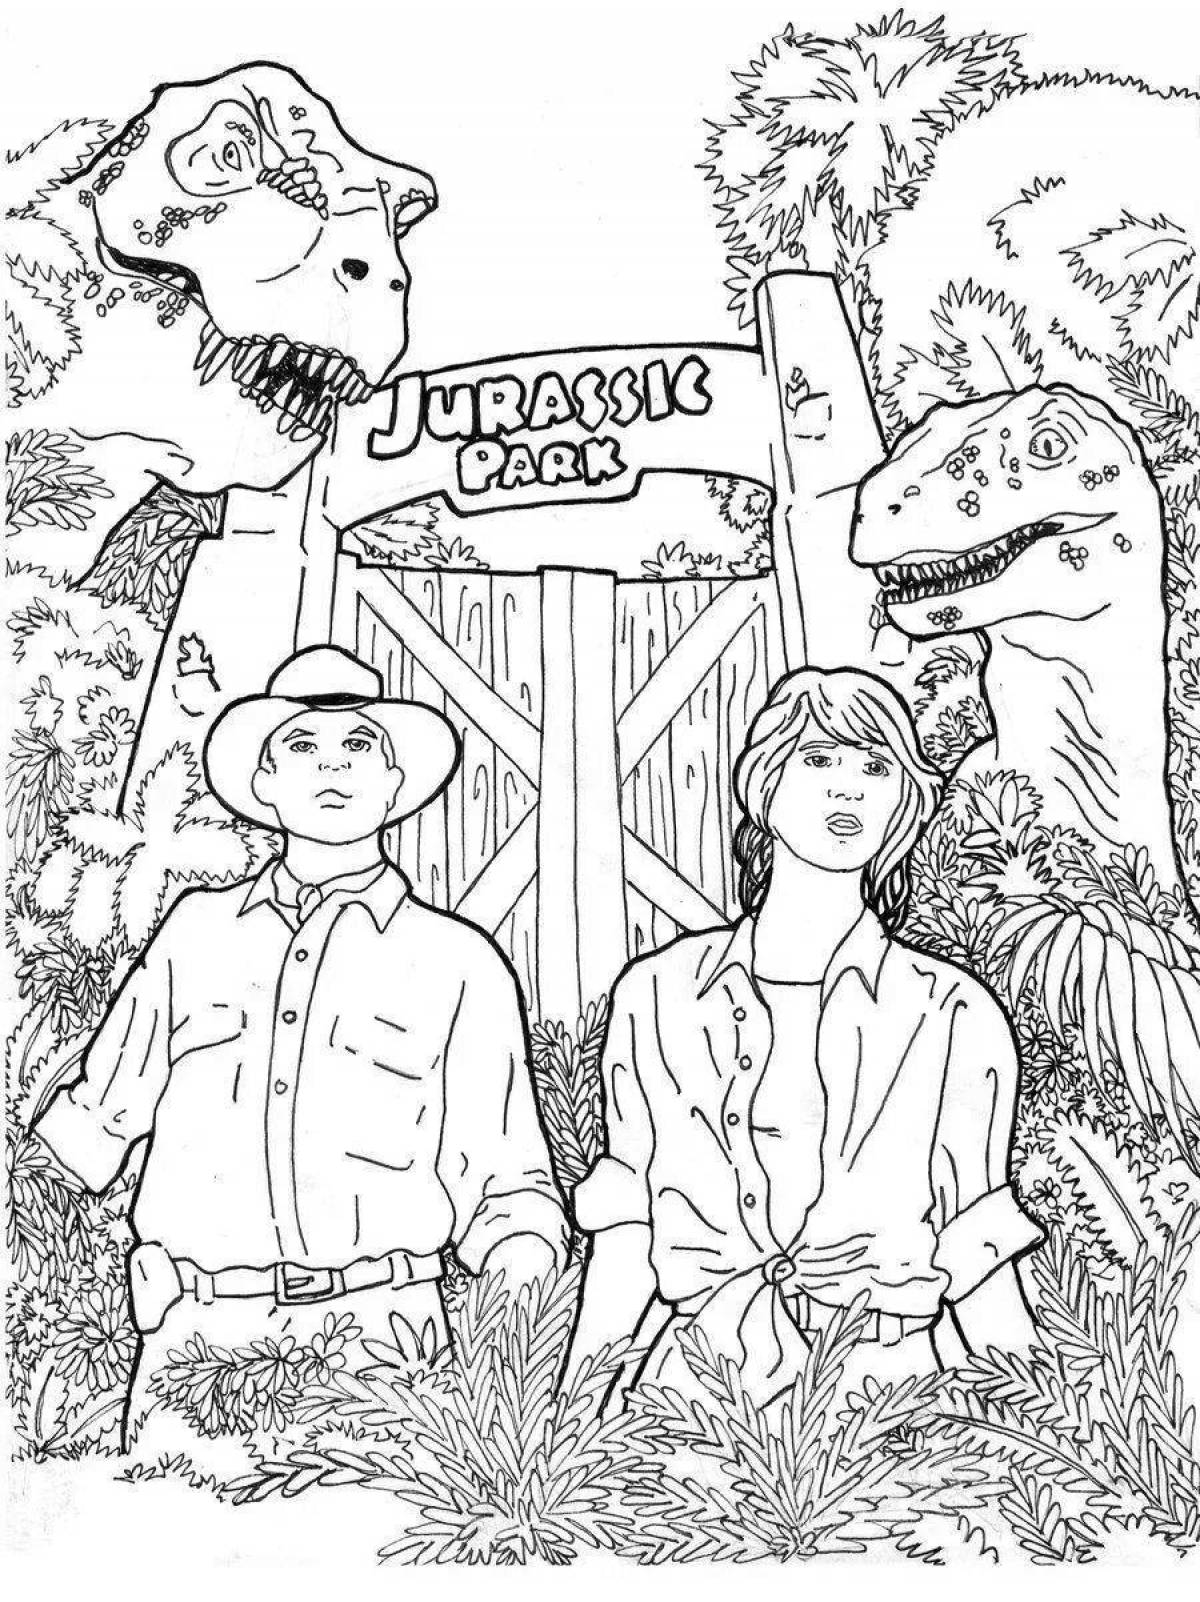 Exotic jurassic world coloring book